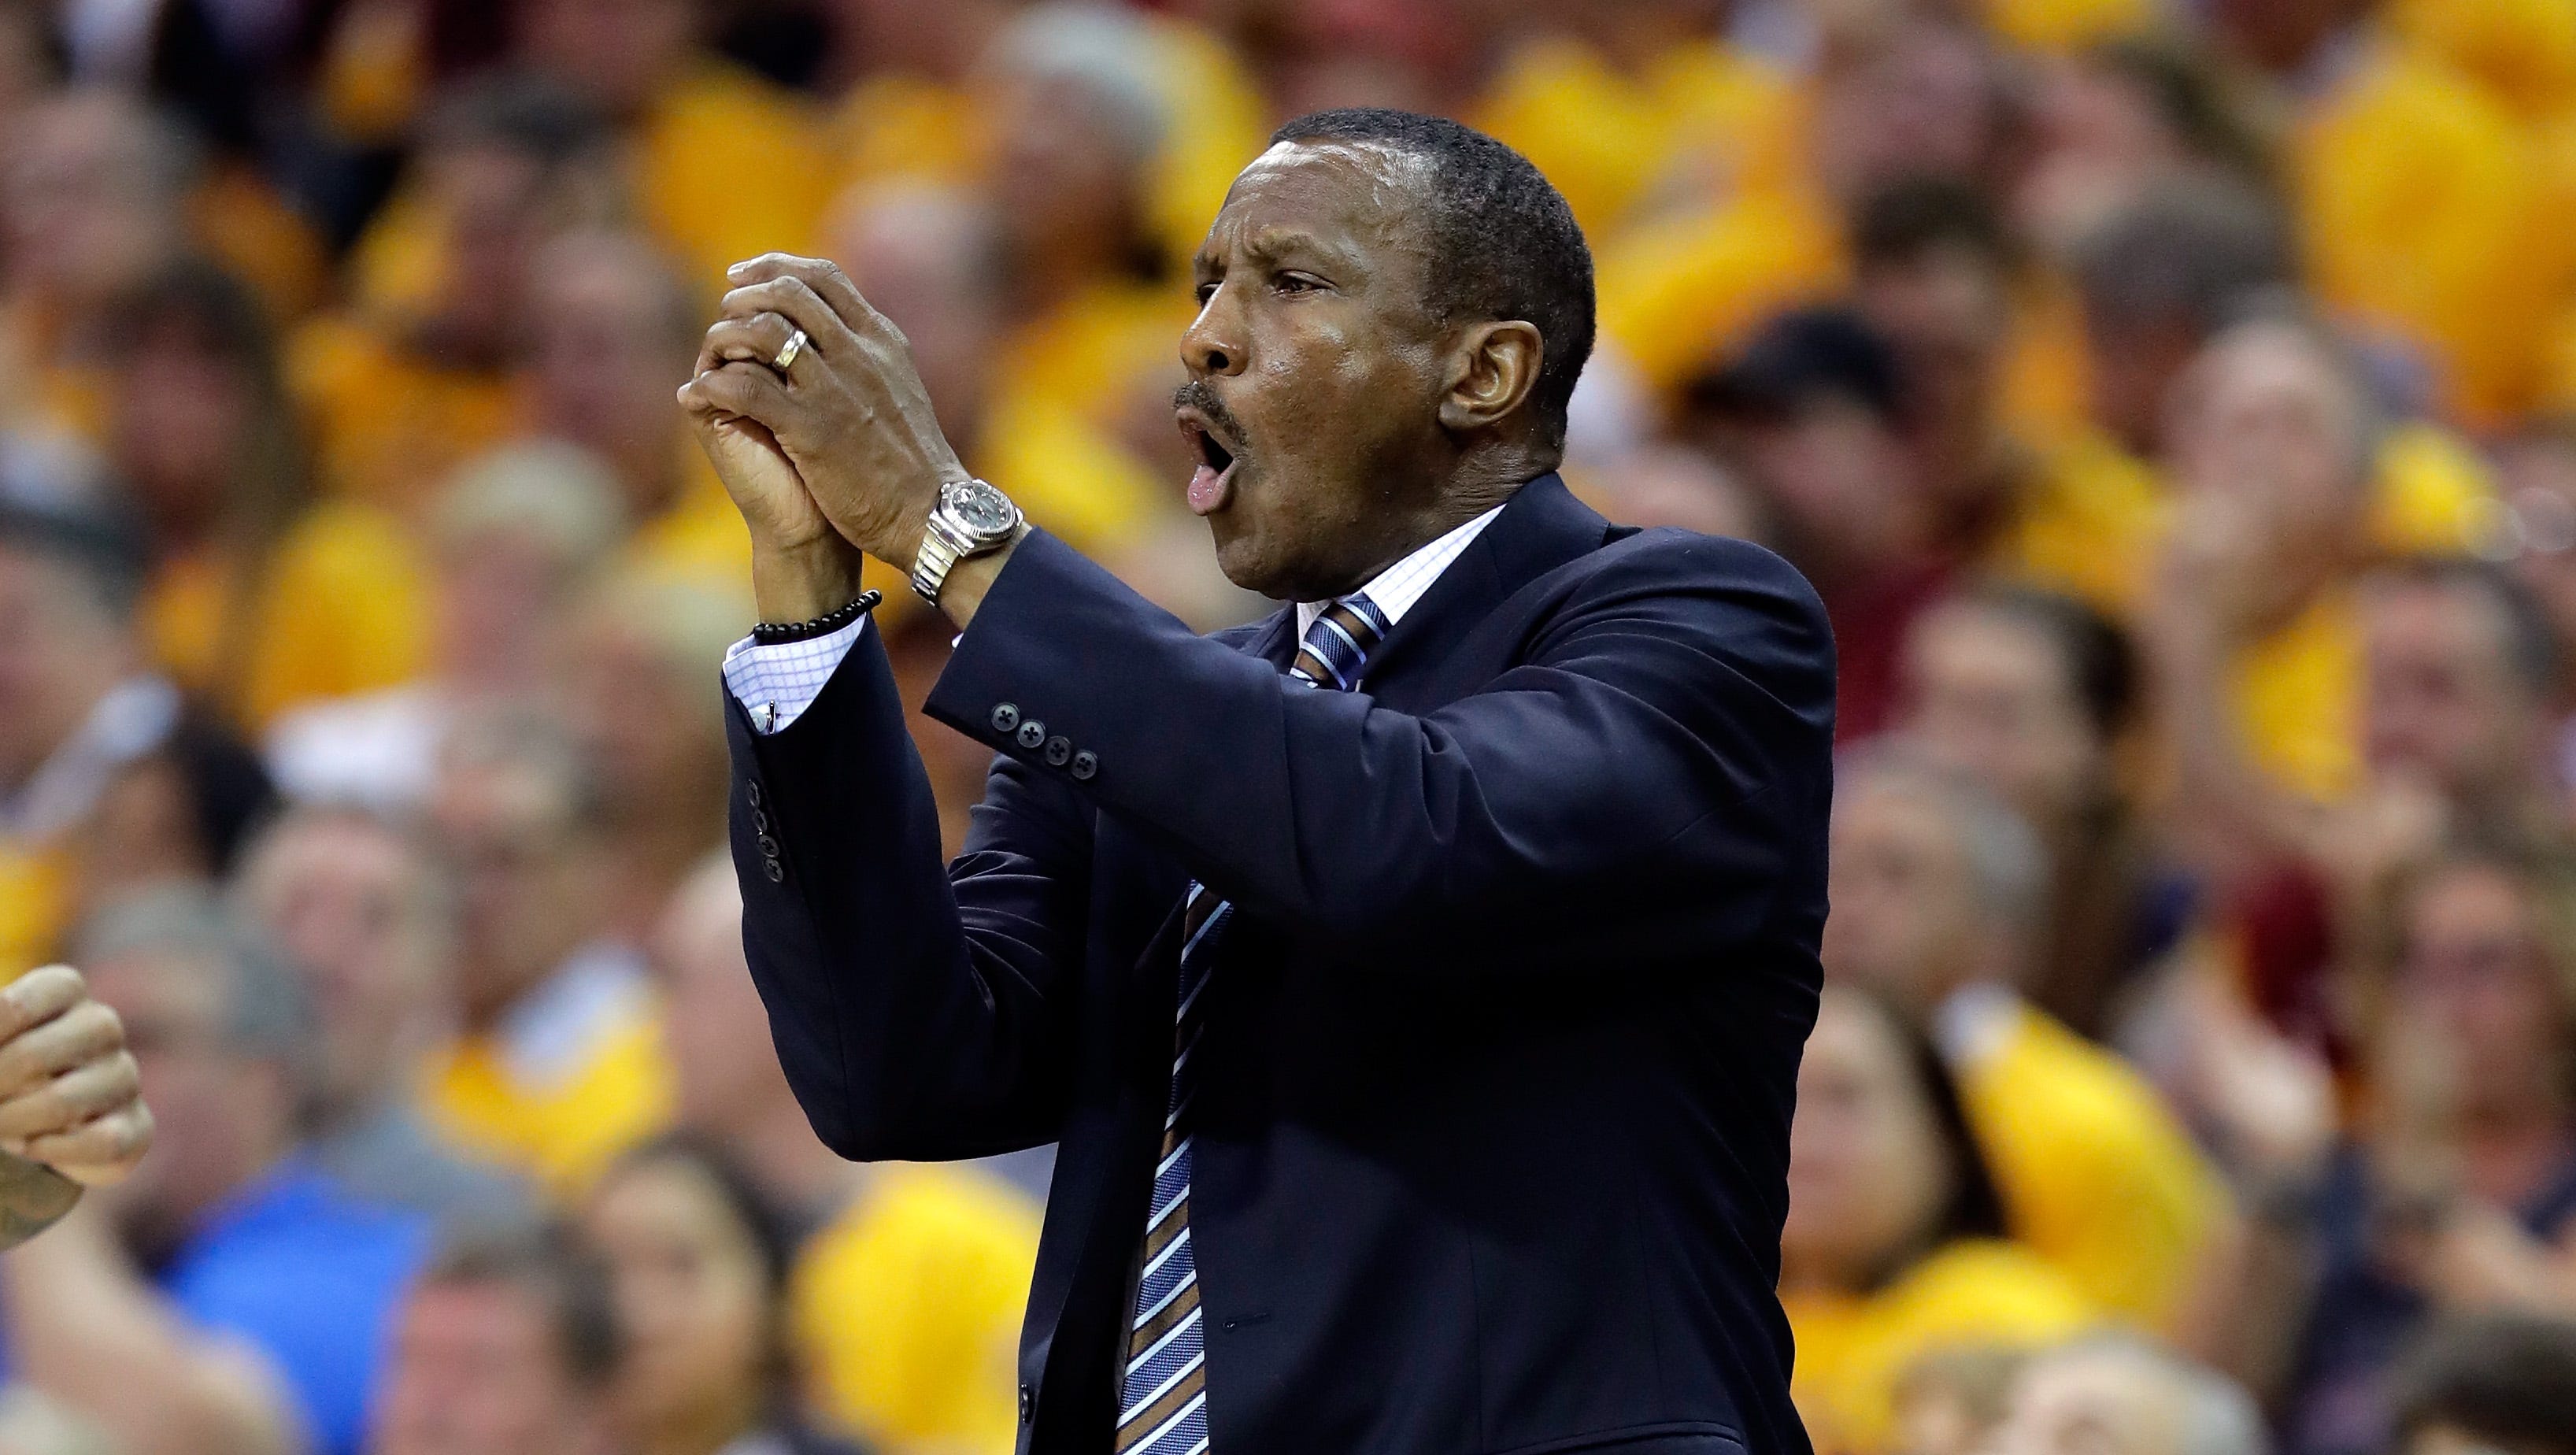 Dwane Casey of the Toronto Raptors gestures from the sideline in the first quarter against the Cleveland Cavaliers in game five of the Eastern Conference Finals during the 2016 NBA Playoffs at Quicken Loans Arena on May 25, 2016 in Cleveland, Ohio.